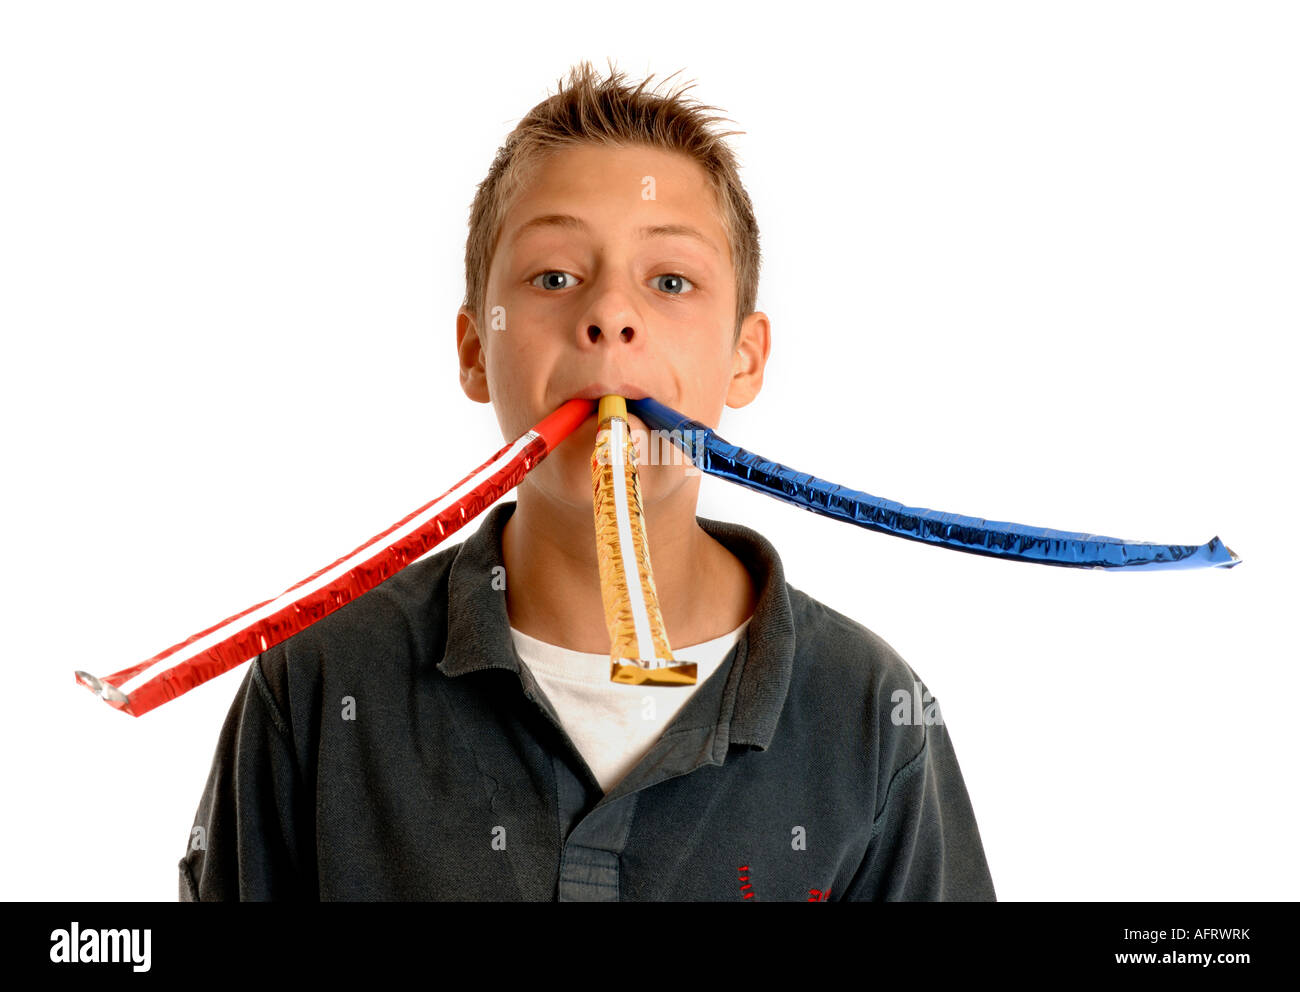 Boy blowing 3 party whistles Stock Photo